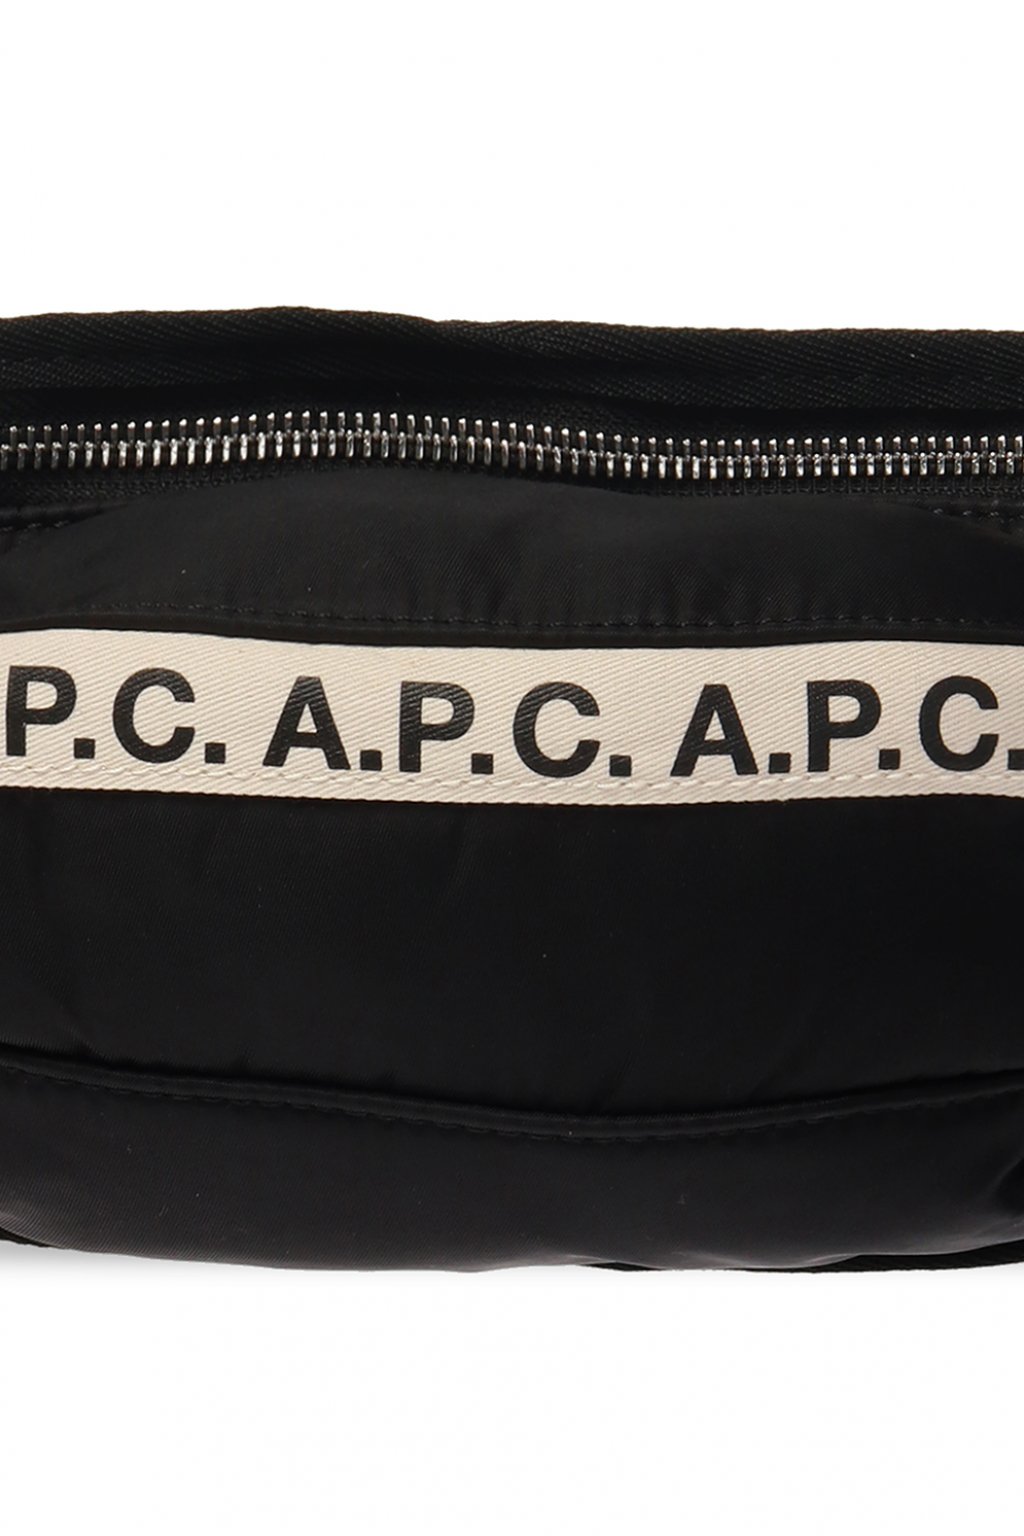 A.P.C. logo top-handle tote Yellow